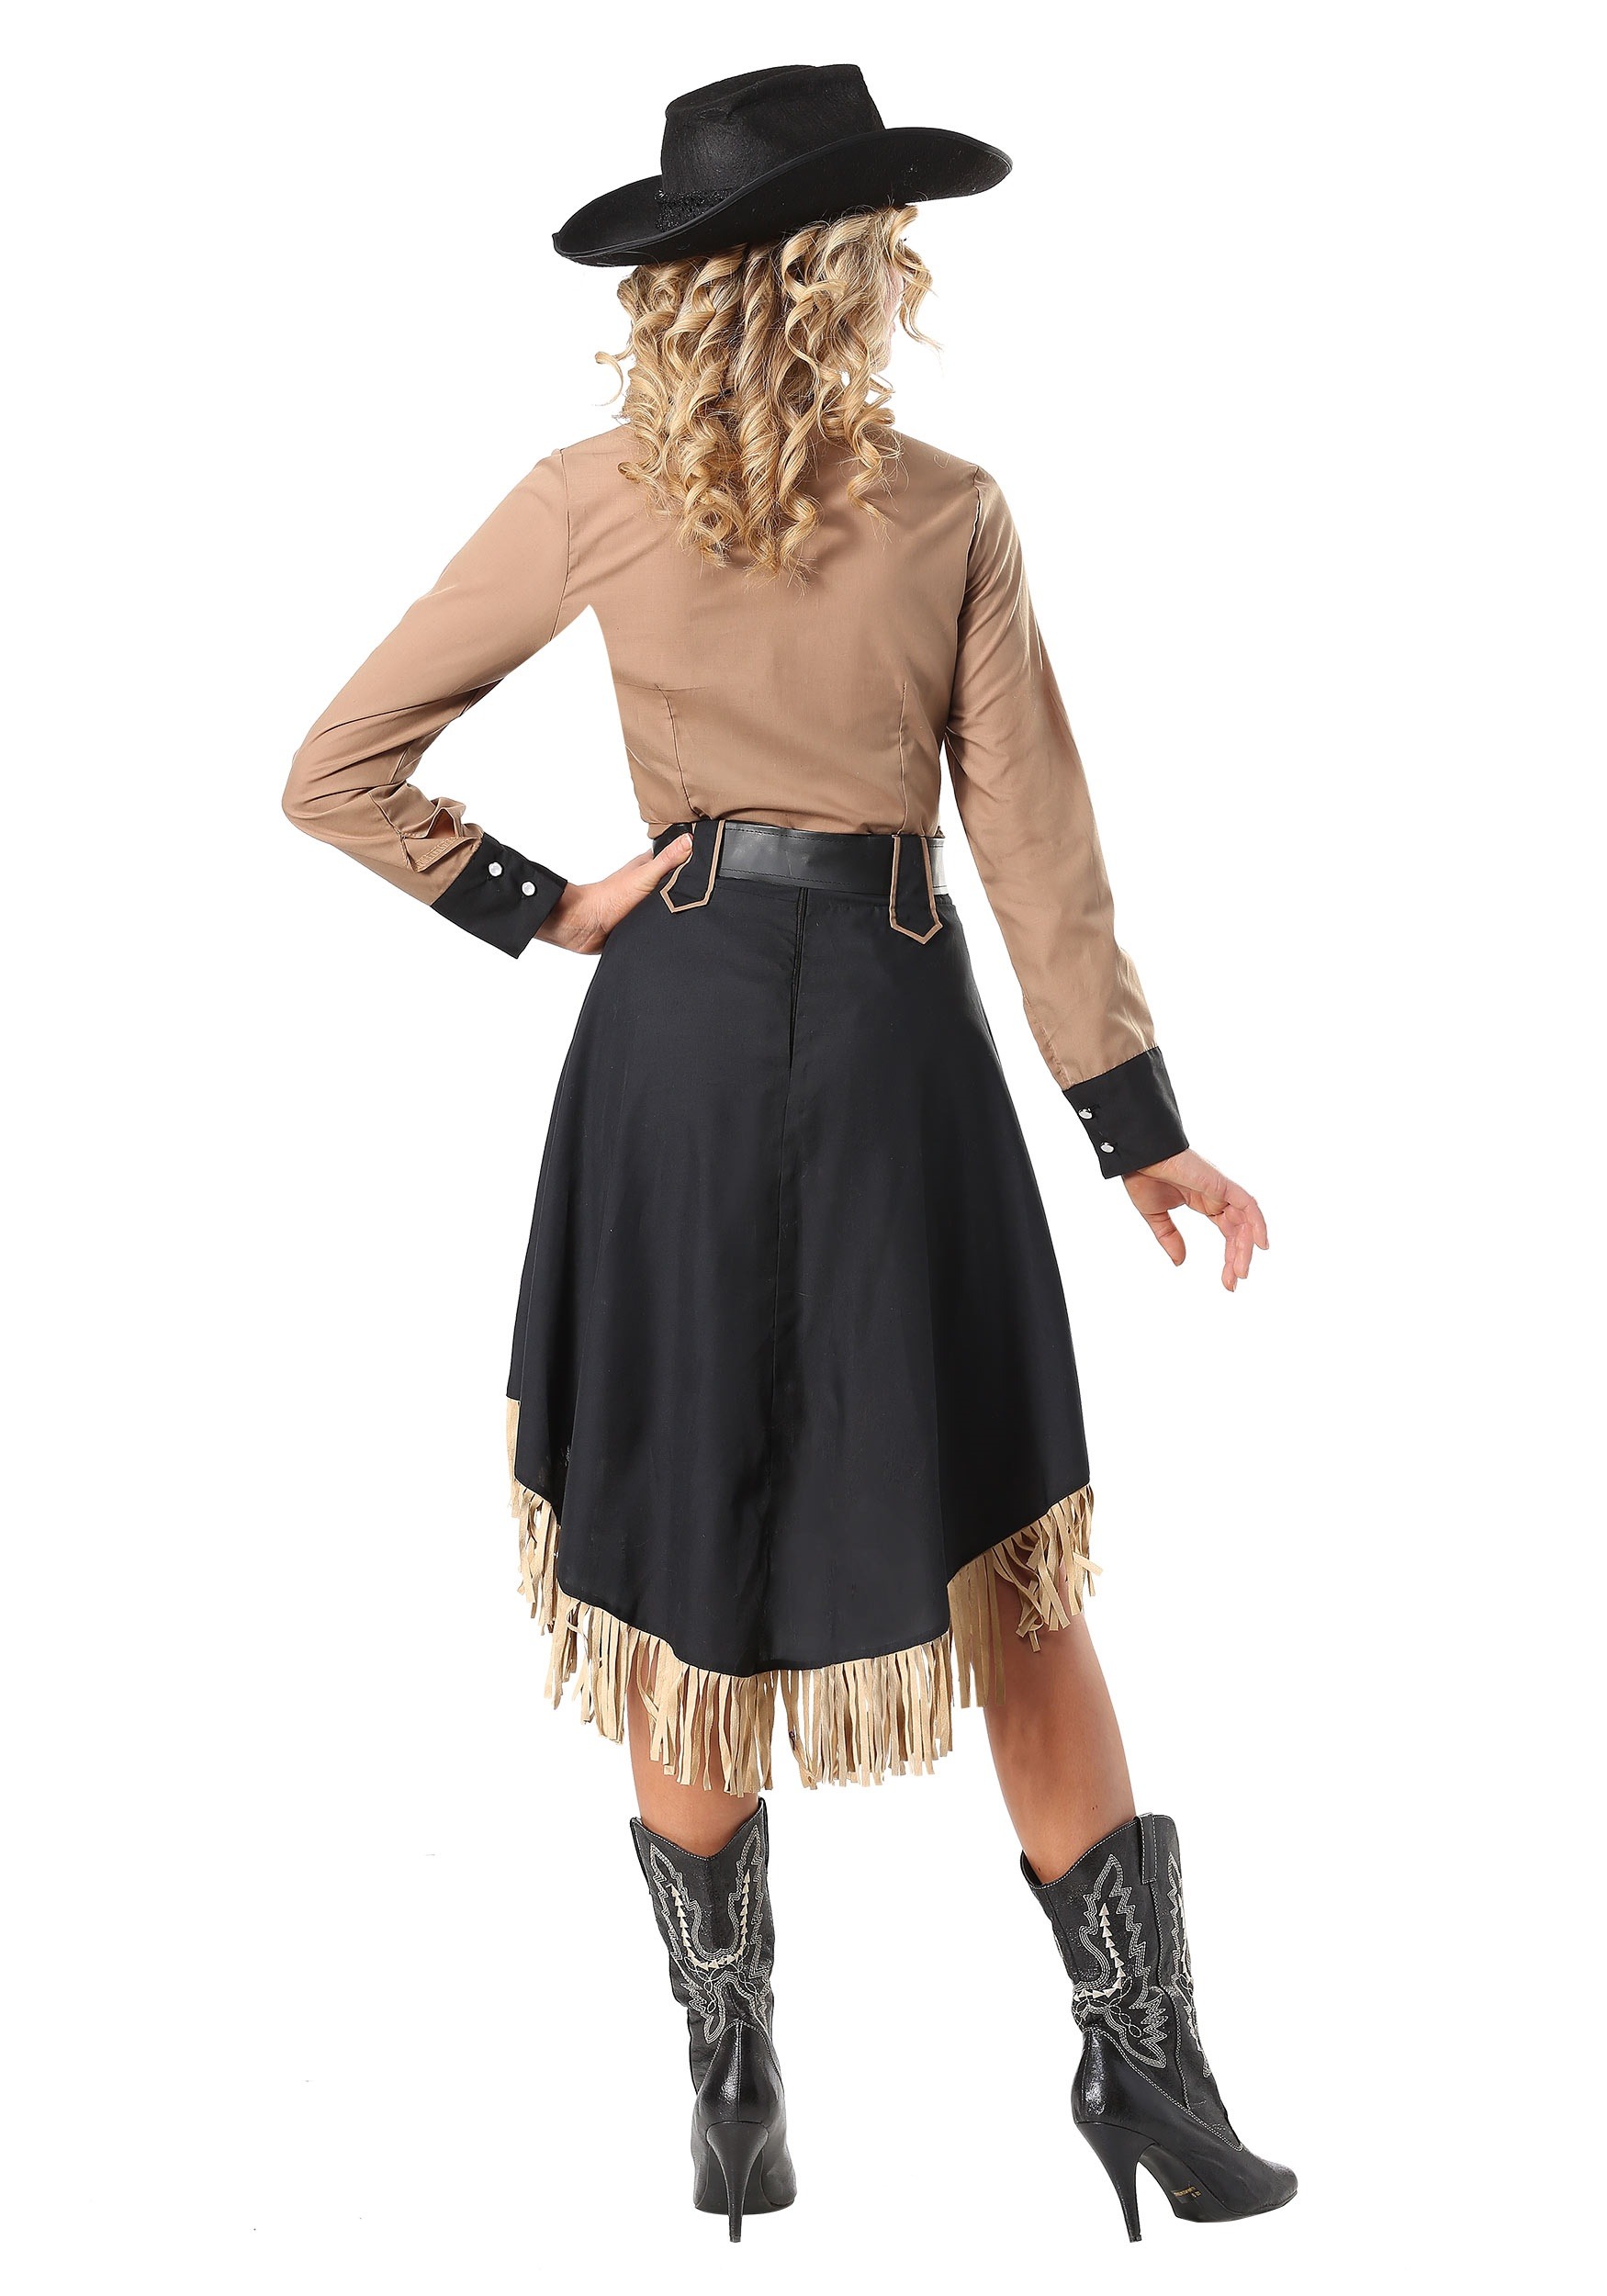 cowgirl skirts and dresses uk